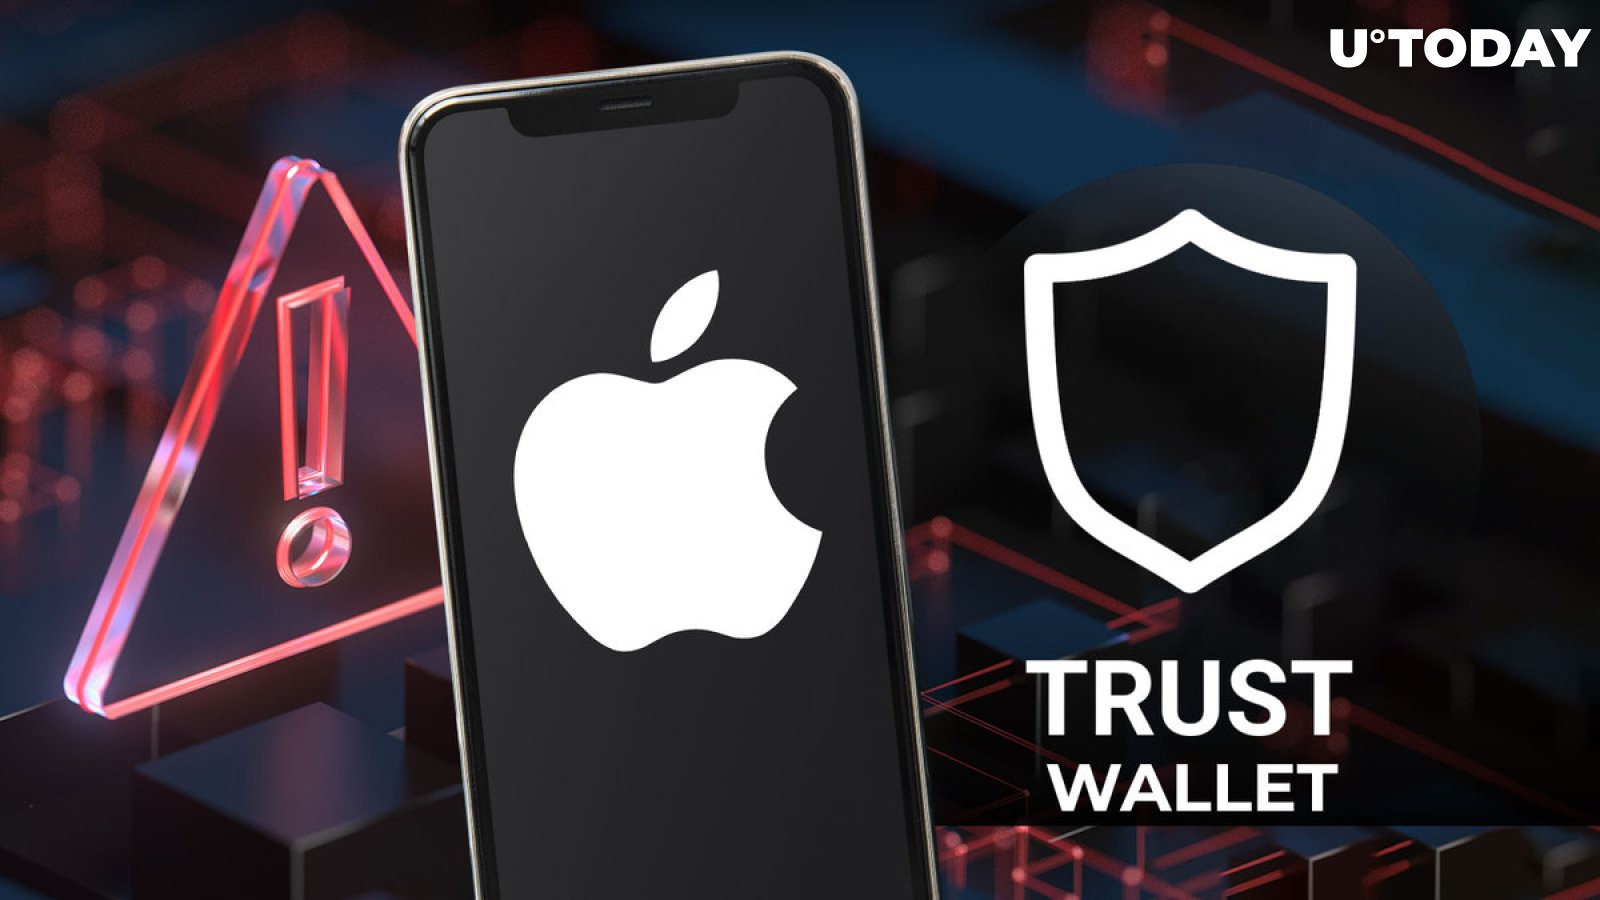 Trust Wallet Issues Important Security Warning to iPhone Users: Details